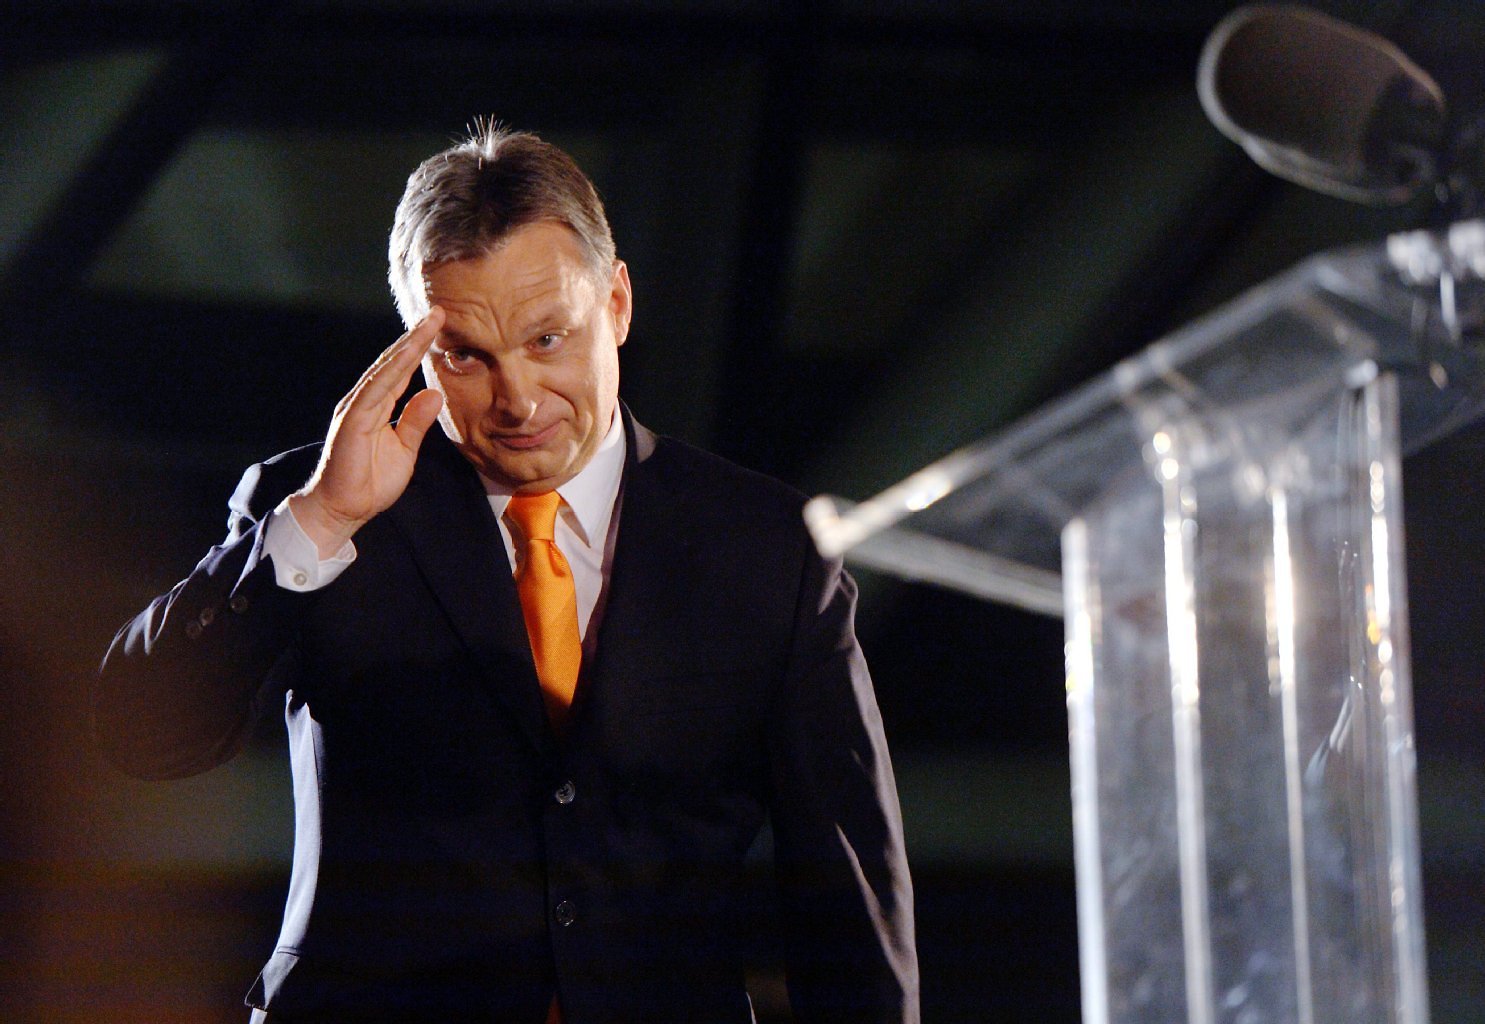 PM Orbán Victoriously Scores Big Win